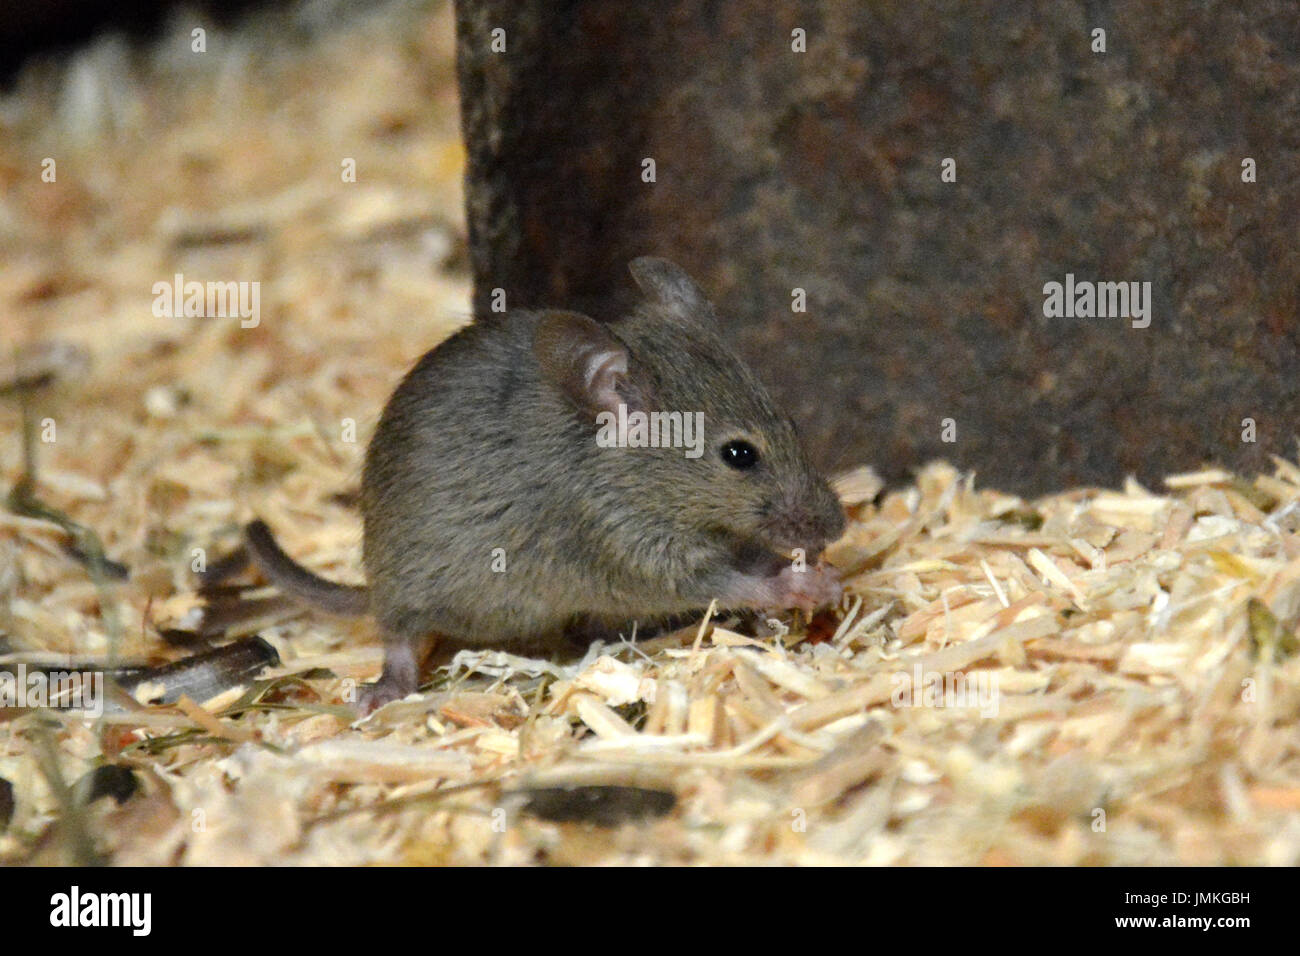 House Mouse (Mus musculus) - sitting and eating or nibbling at a seed Stock Photo